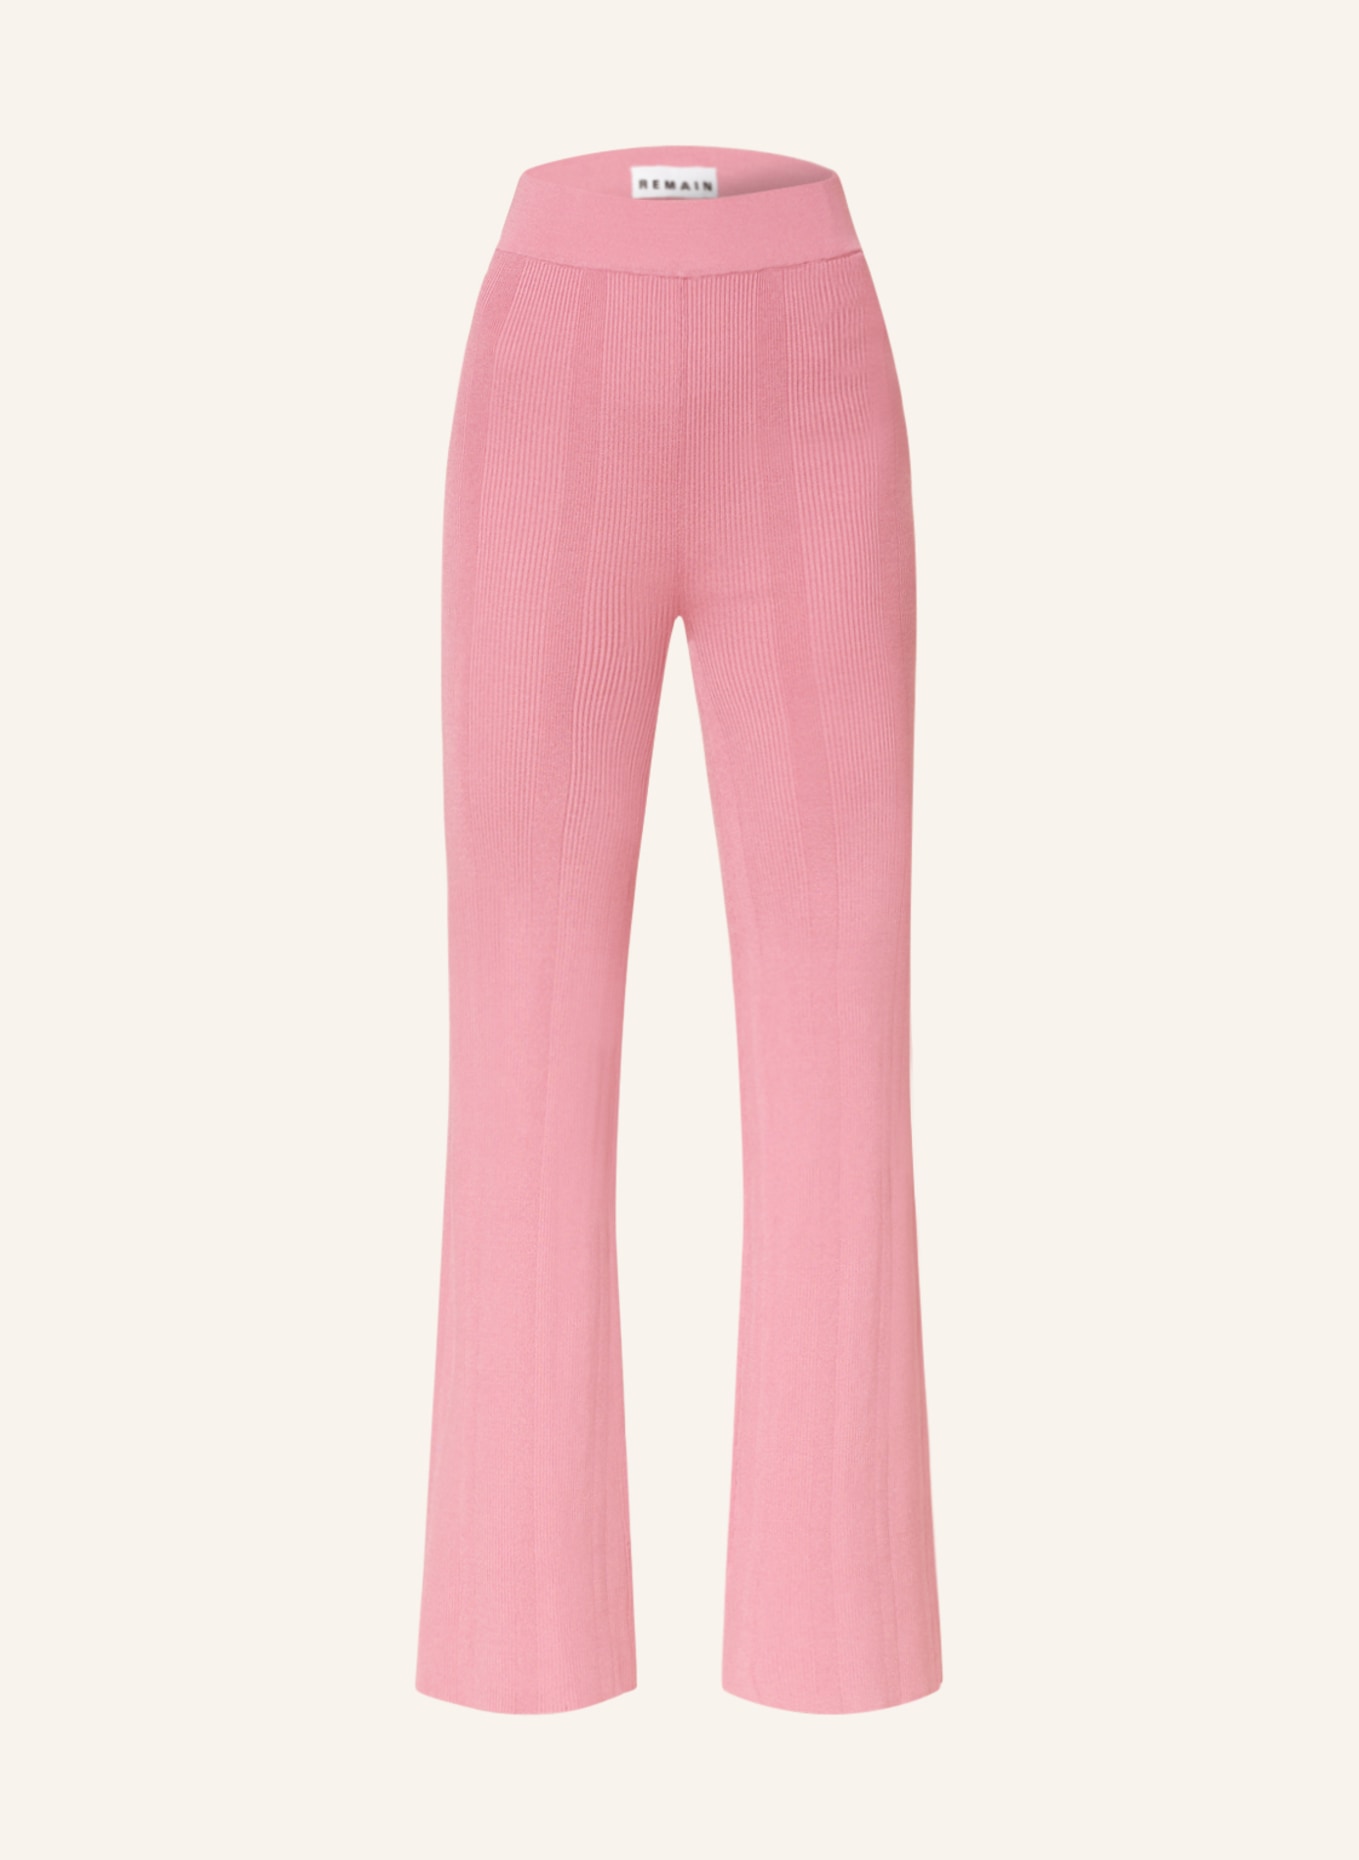 REMAIN Knit trousers, Color: ROSE (Image 1)